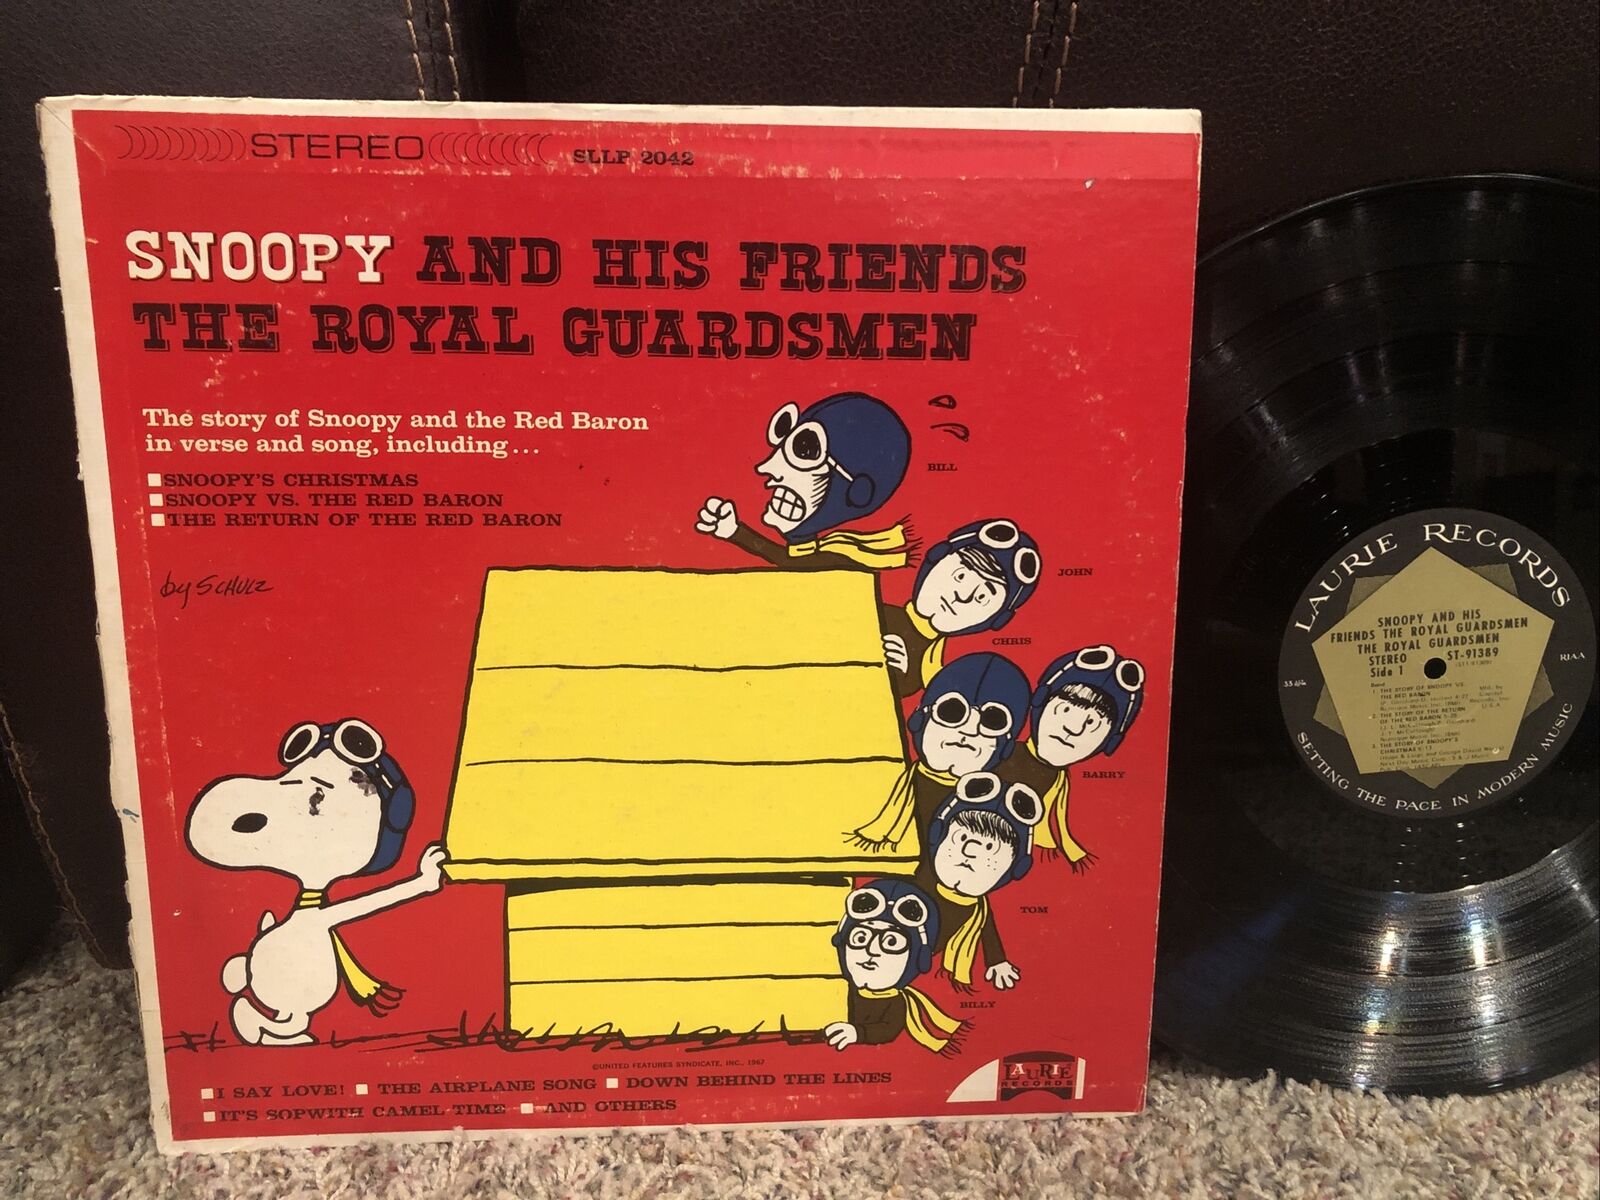 THE ROYAL GUARDSMEN LP SNOOPY AND HIS FRIENDS LAURIE SLLP 2042 STEREO VG+ VINYL